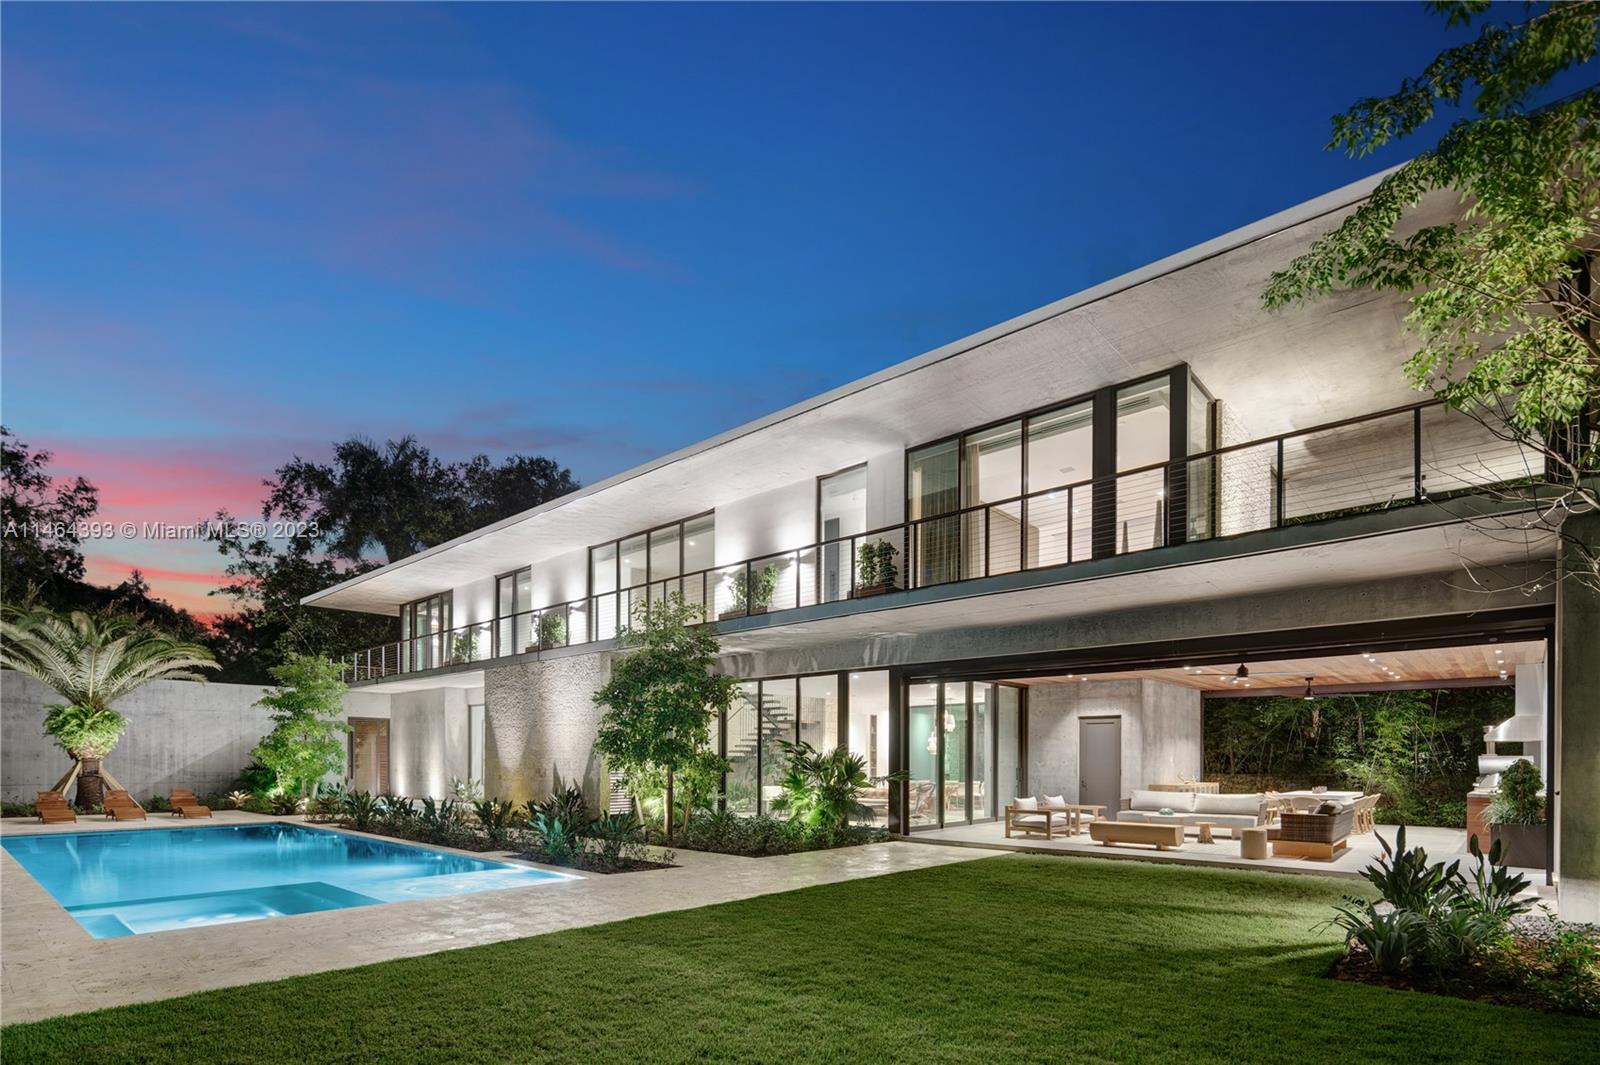 Welcome to a tropical paradise located in the exclusive Ye Little Wood gated enclave in Coconut Grove. This masterpiece of modern luxury, designed by [STRANG] Design, is a newly constructed 7500 sf 2 story, resting on a 21,600 sf Oasis. The home features 6 bd, 5.5 ba, kitchen by Designspace, ensuite guest bedrooms, private office & detached guest suite. Indulge in ultimate outdoor living with wrap-around balconies, outdoor covered patio with summer kitchen featuring a grill & pizza oven, retracting screen walls, pool & spa. Featuring a full solar panel & battery backup system by Tesla incl. Tesla car charging, Crestron lighting control, Sonos sound, camera security, Impact Glass, weather resistant materials, maids qtrs, workshop, storage, 2-car garage & just minutes to the Village center.